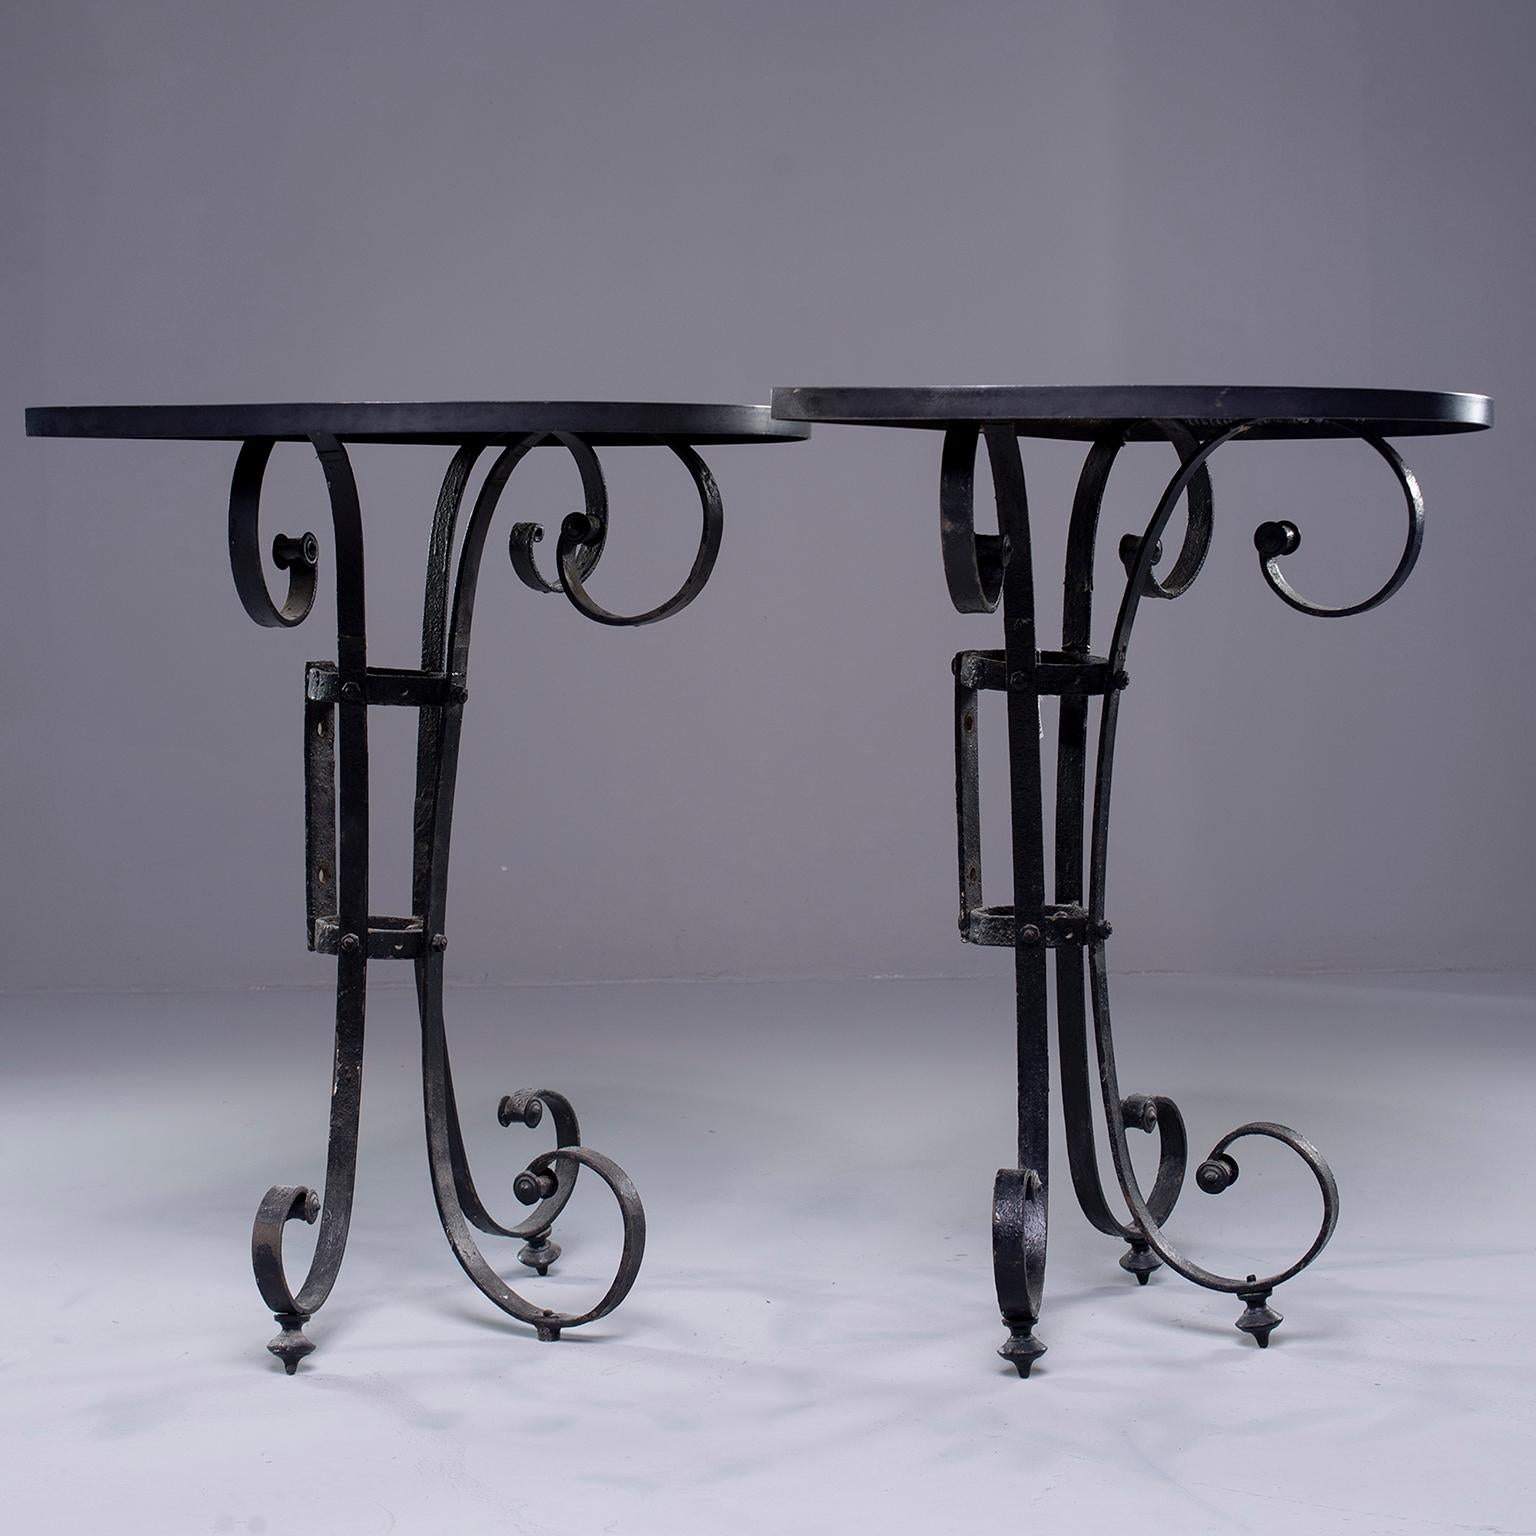 Pair of Demilune Consoles with Italian Iron Candelabra Base and Black Metal Tops (19. Jahrhundert)